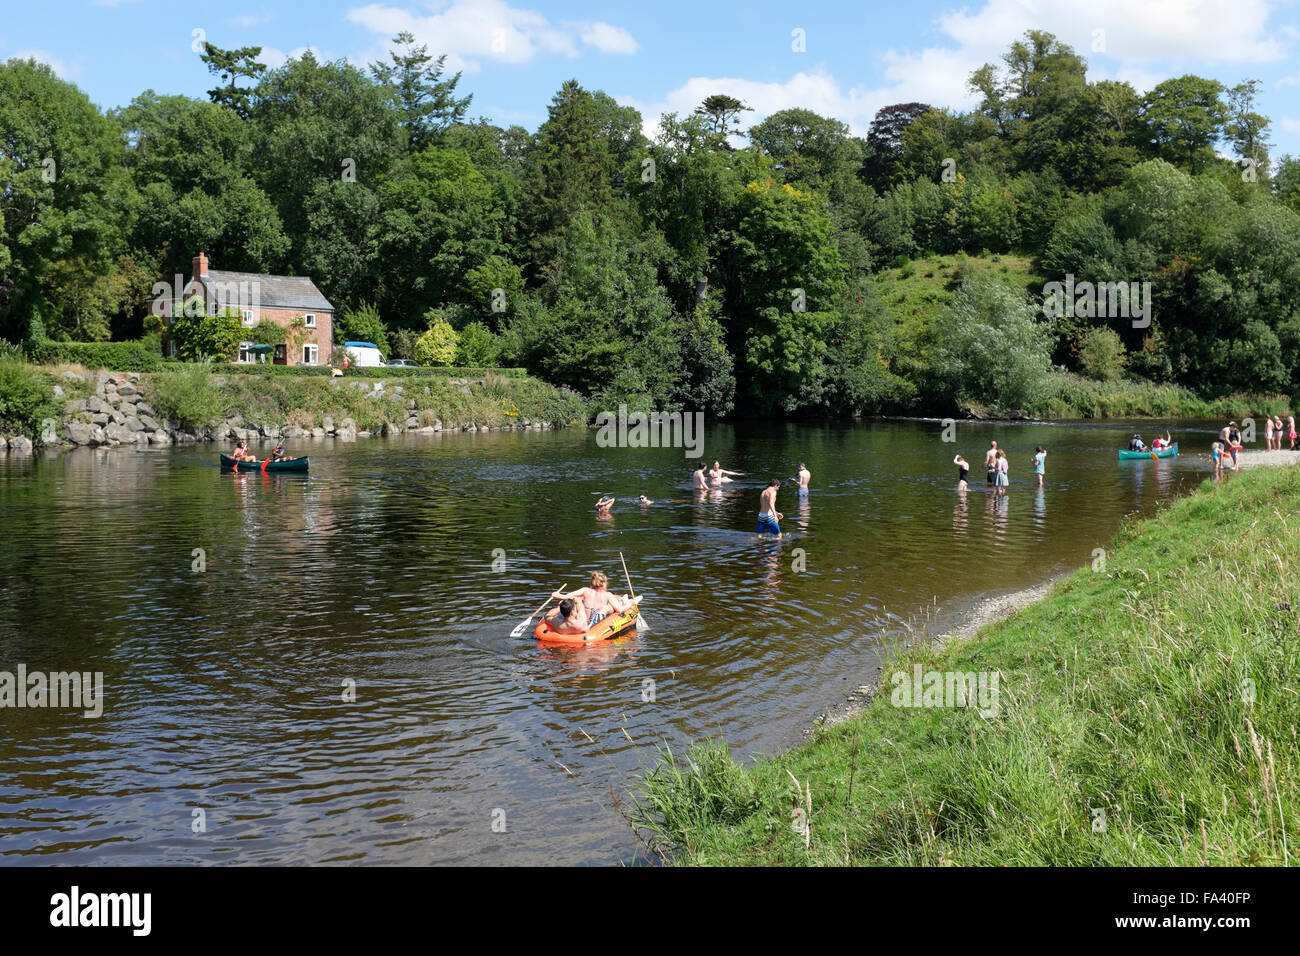 People enjoying boating, paddling and swimming on and in the river Wye on the outskirts of Hay-on-Wye, Powys, Wales Stock Photo